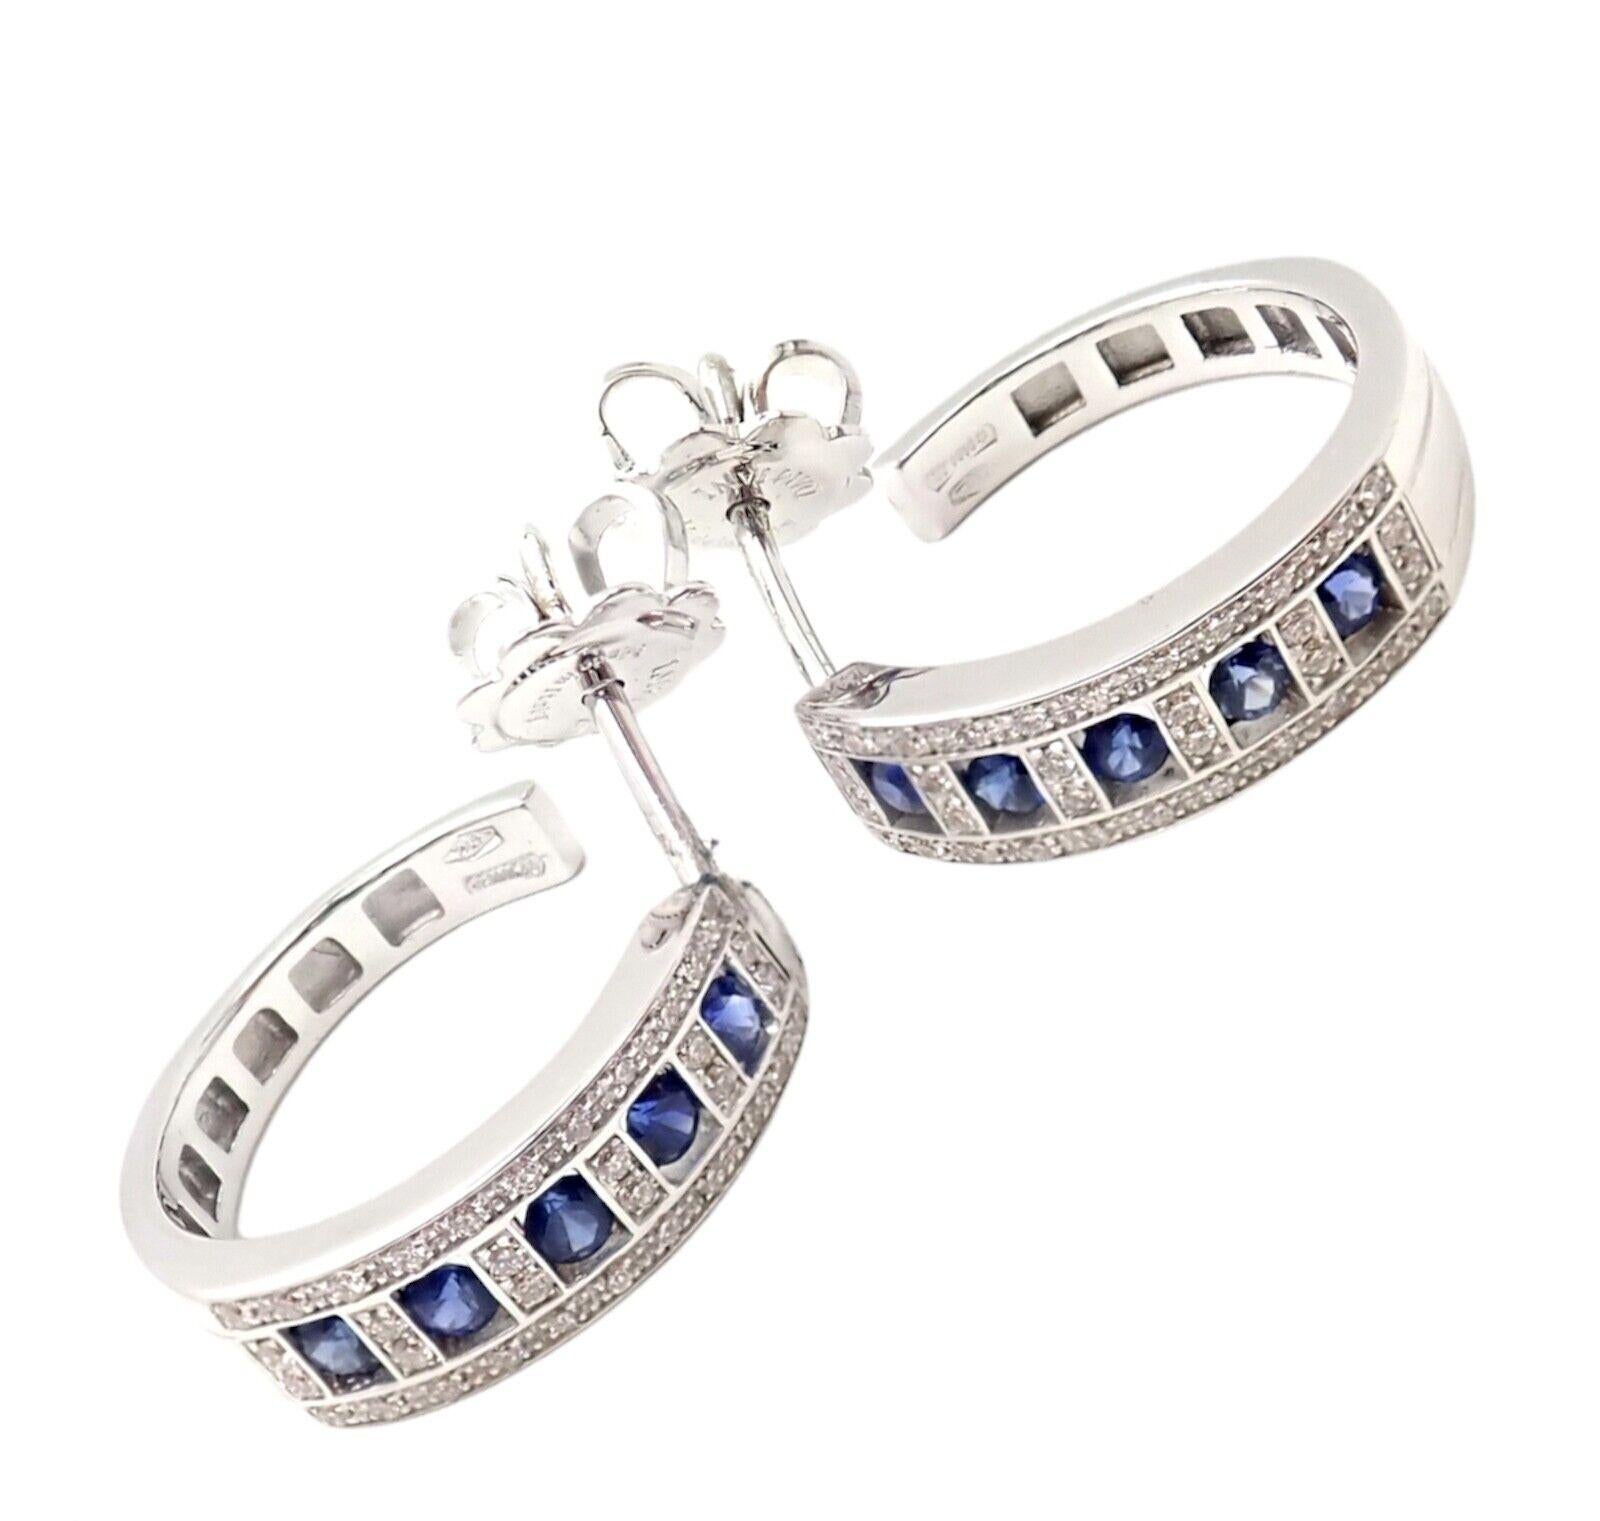 18k White Gold Diamond And Sapphire Hoop Earrings by Damiani.  
With 36 round old brilliant cut diamond E-G color, VS-SI clarity total weight approx. .35ctw
10 round brilliant cut sapphires  
These earrings come with original box and paper.
Details: